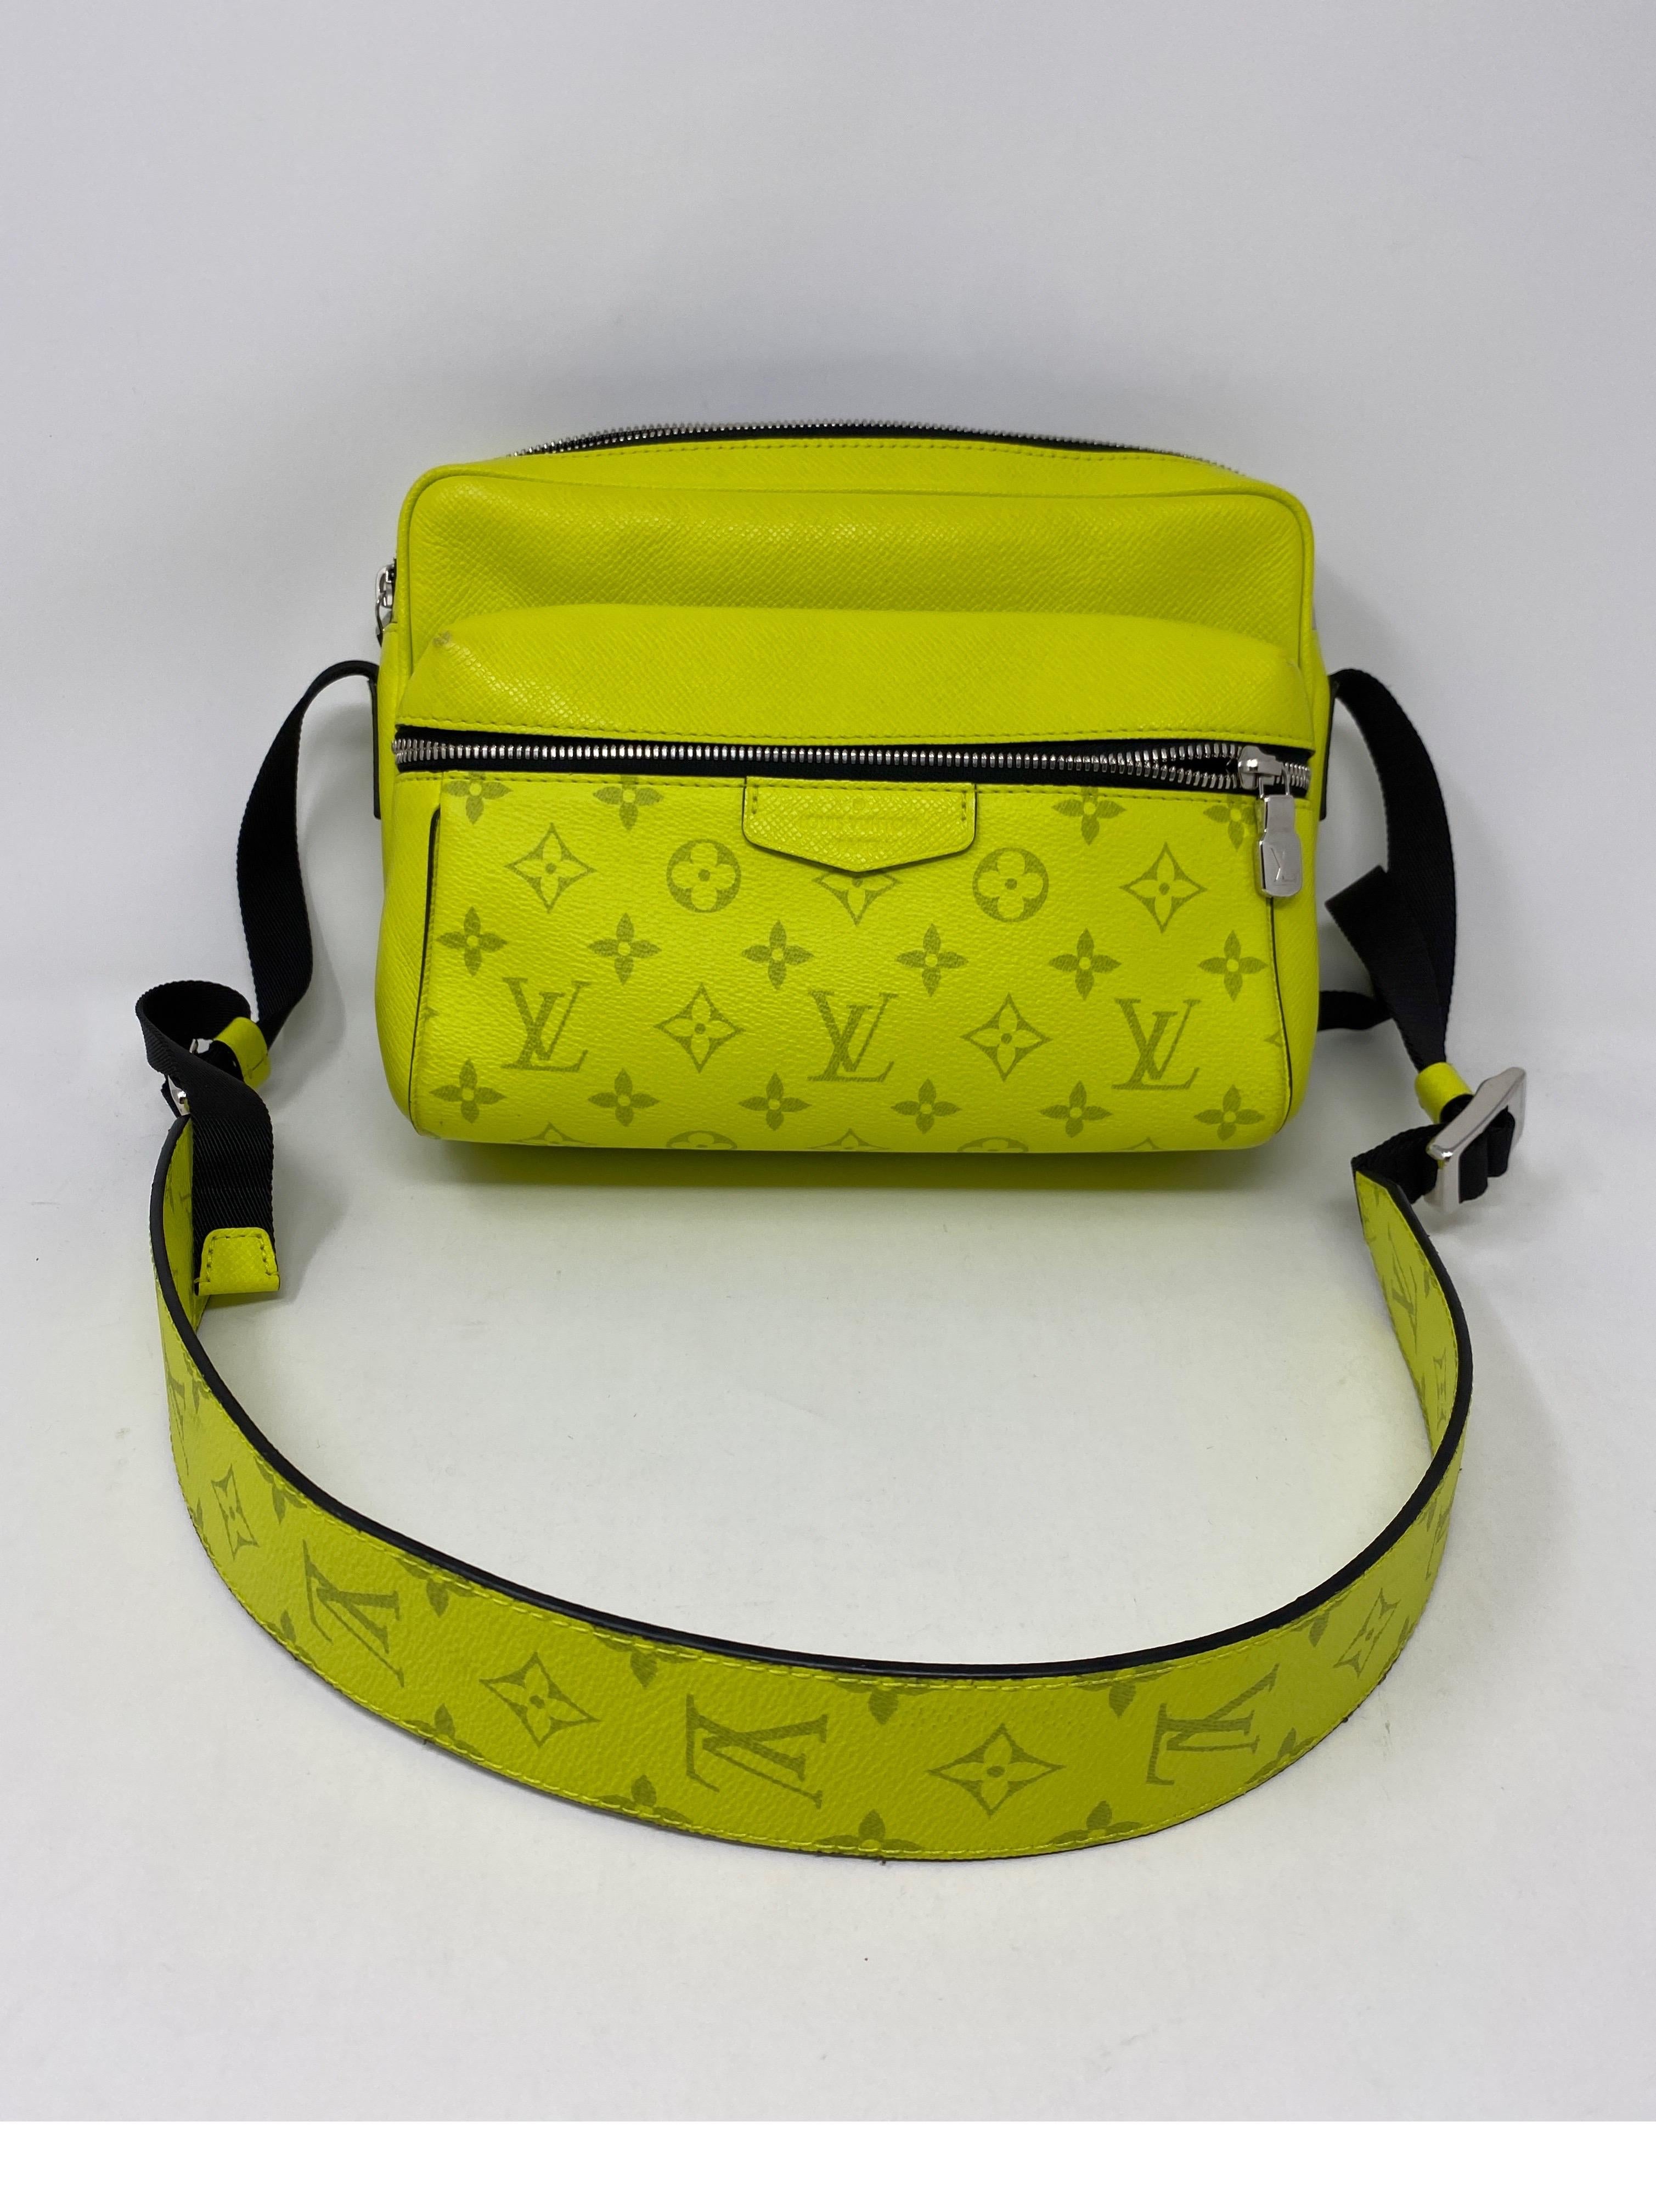 Louis Vuitton Yellow Taigarama Monogram Outdoor Messenger Bag. PM size. Good condition. Rare and limited bag. Adjustable strap can be worn crossbody or shorter. Bright neon yellow color bag. Collector's piece. Guaranteed authentic. 